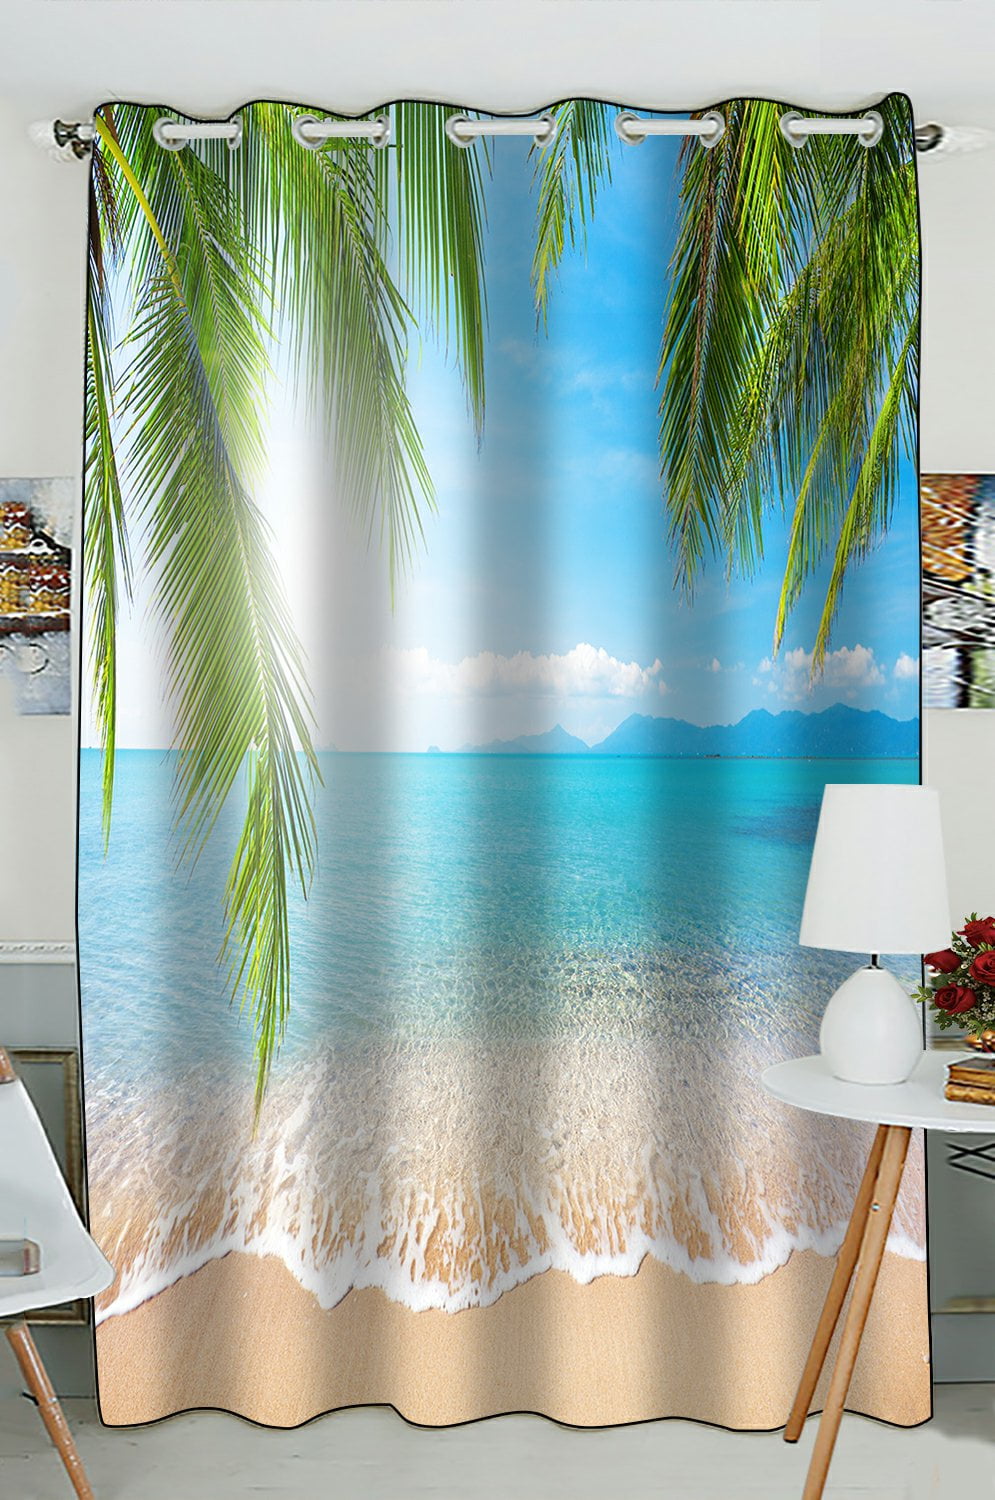 3D Tropical Sea Beach Palm Tree Scenic Printing Window Curtains Blockout Fabric 